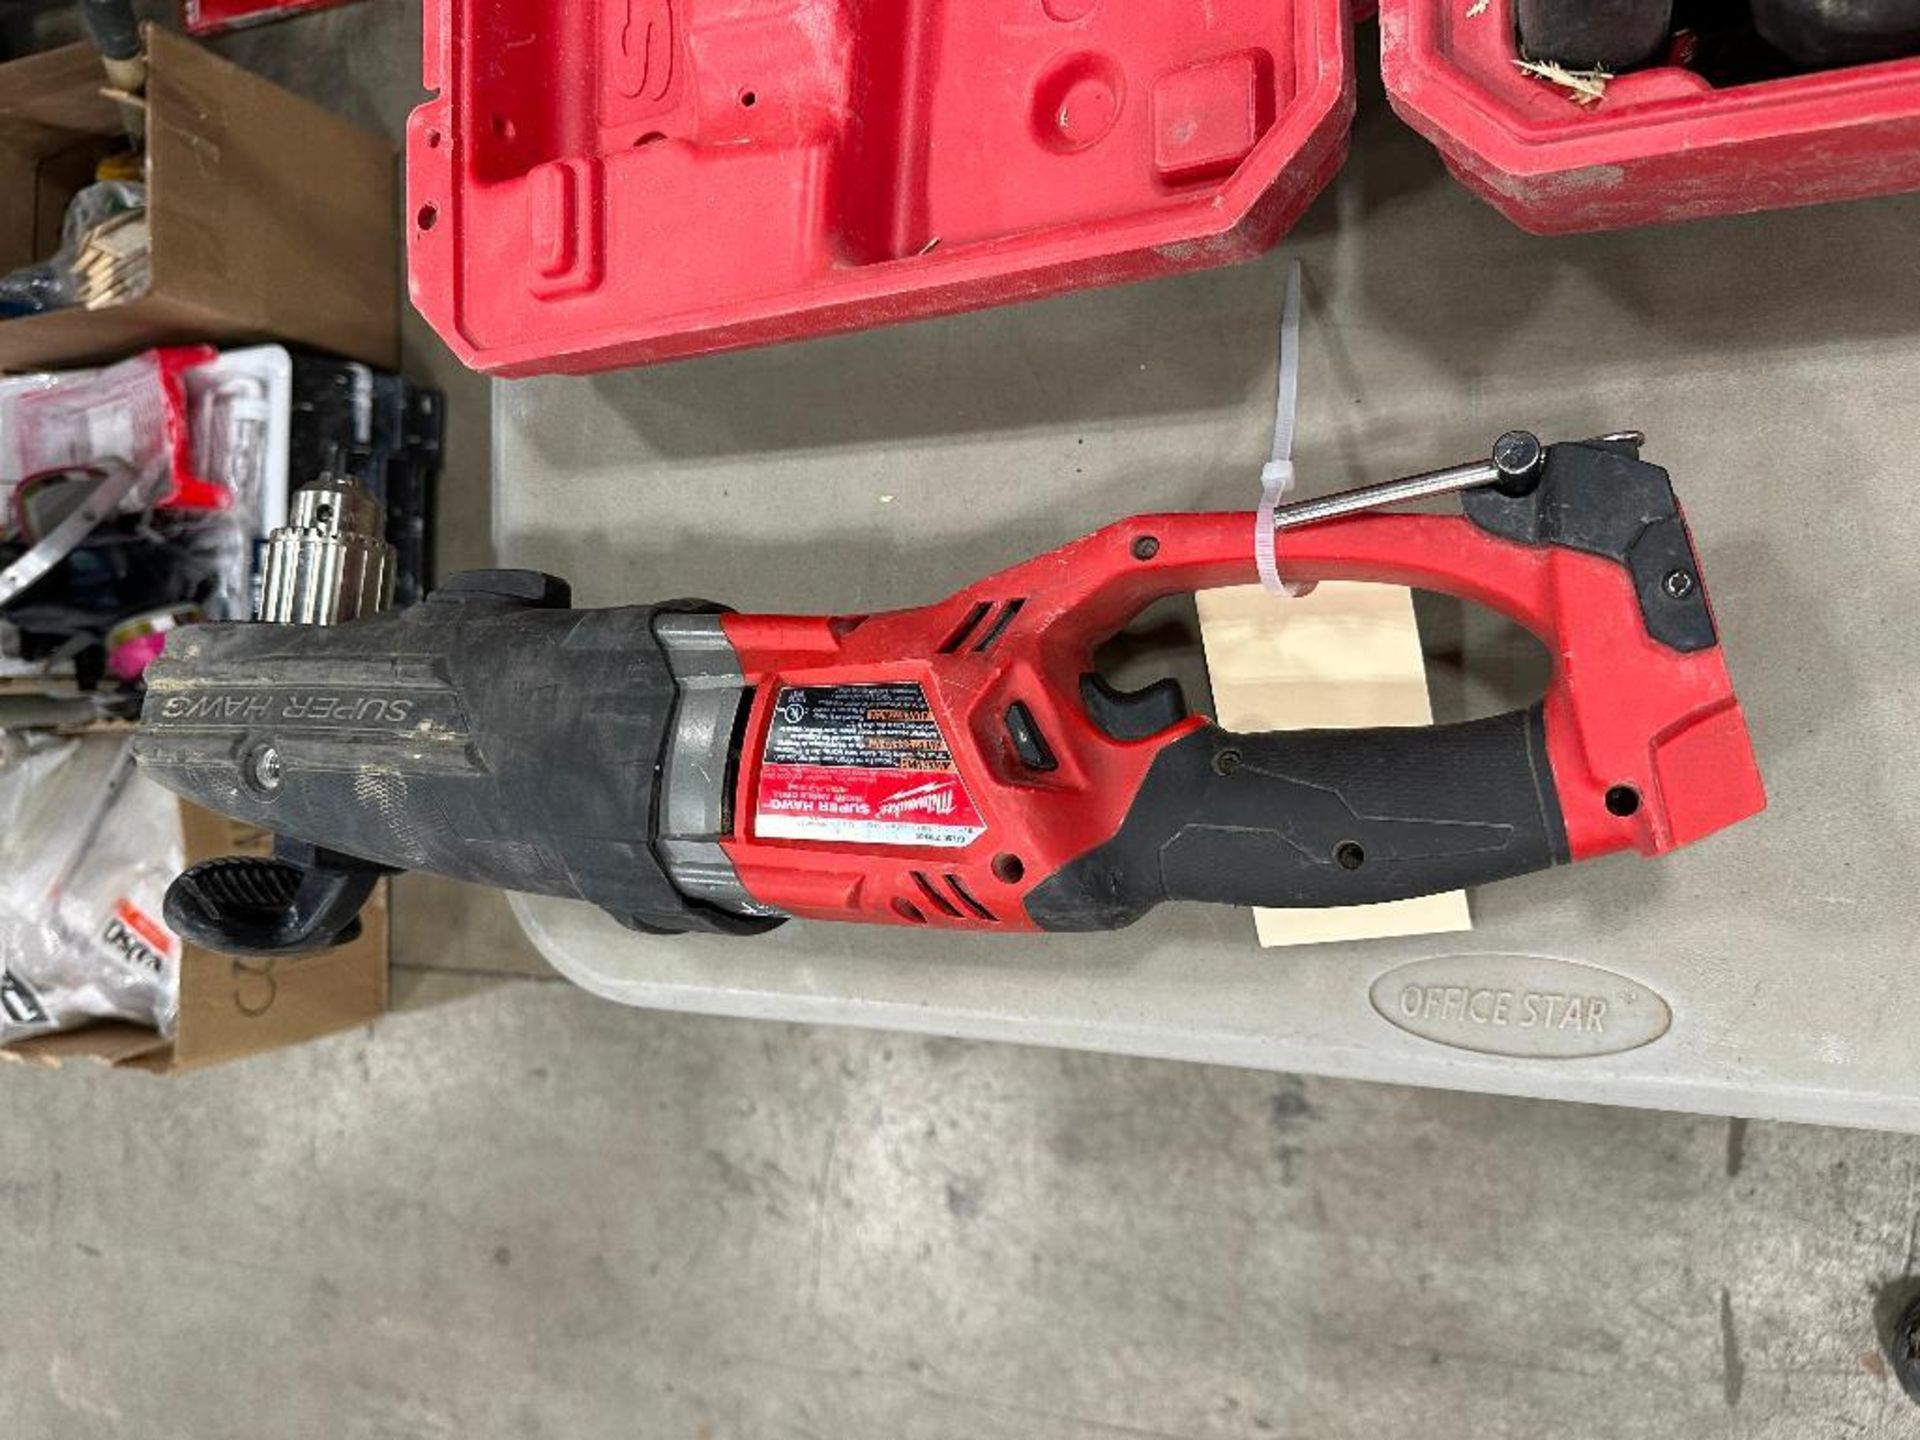 Milwaukee Fuel Cordless Super Hawg 1/2” Right Angle Drill - Image 5 of 7